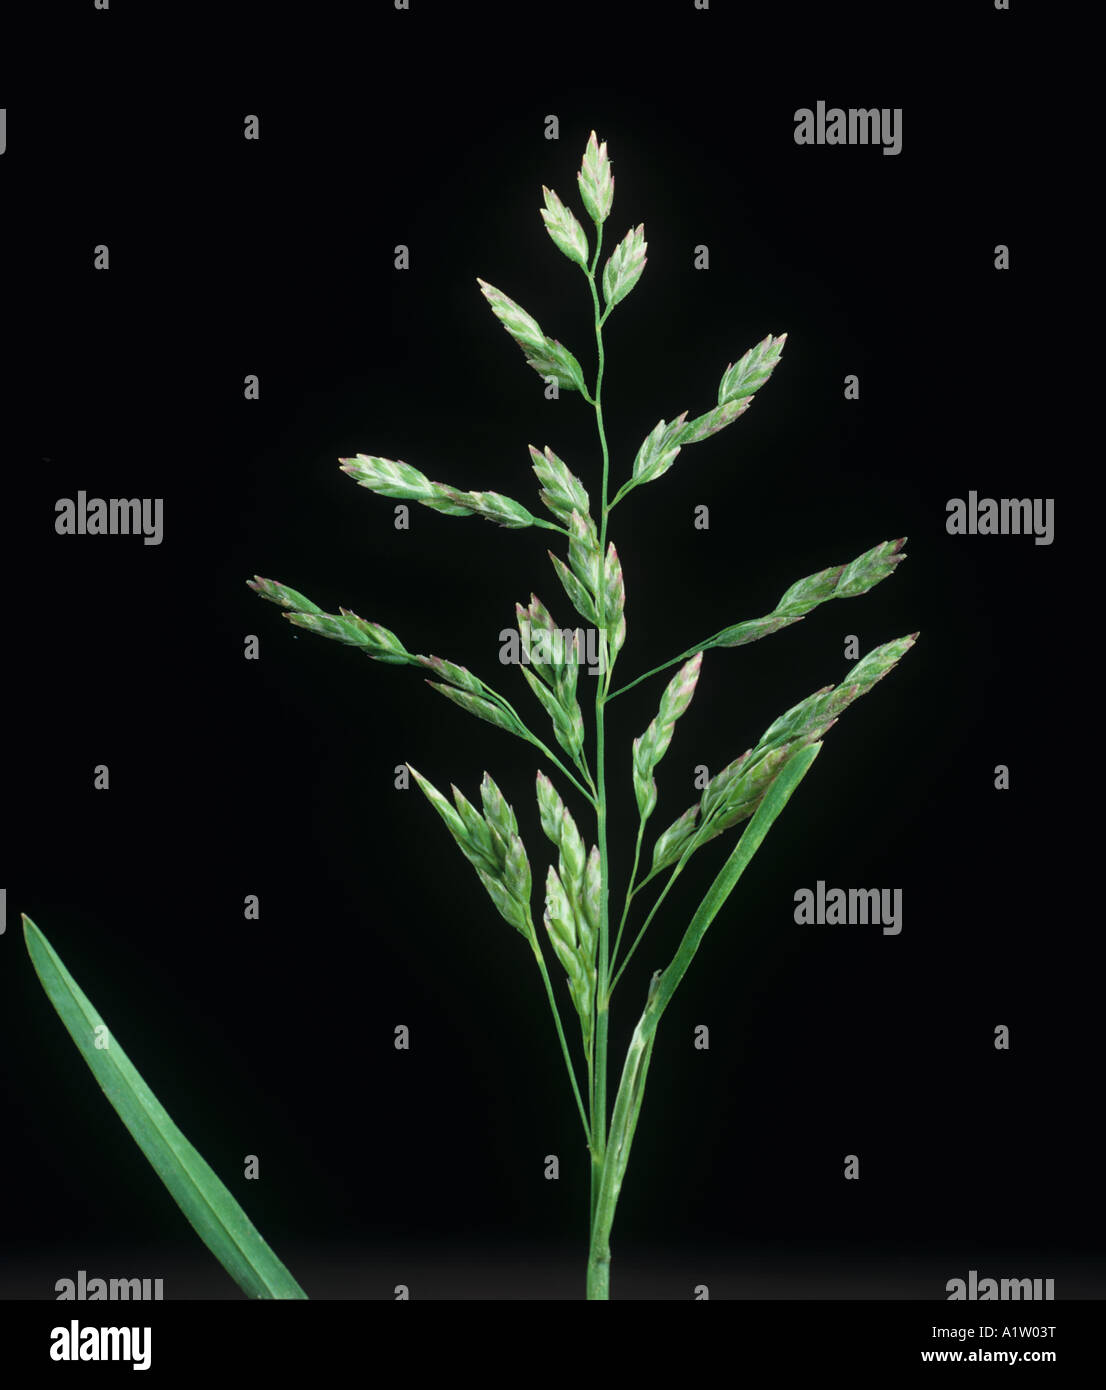 Annual meadow grass Poa annua unopened flower spike Stock Photo